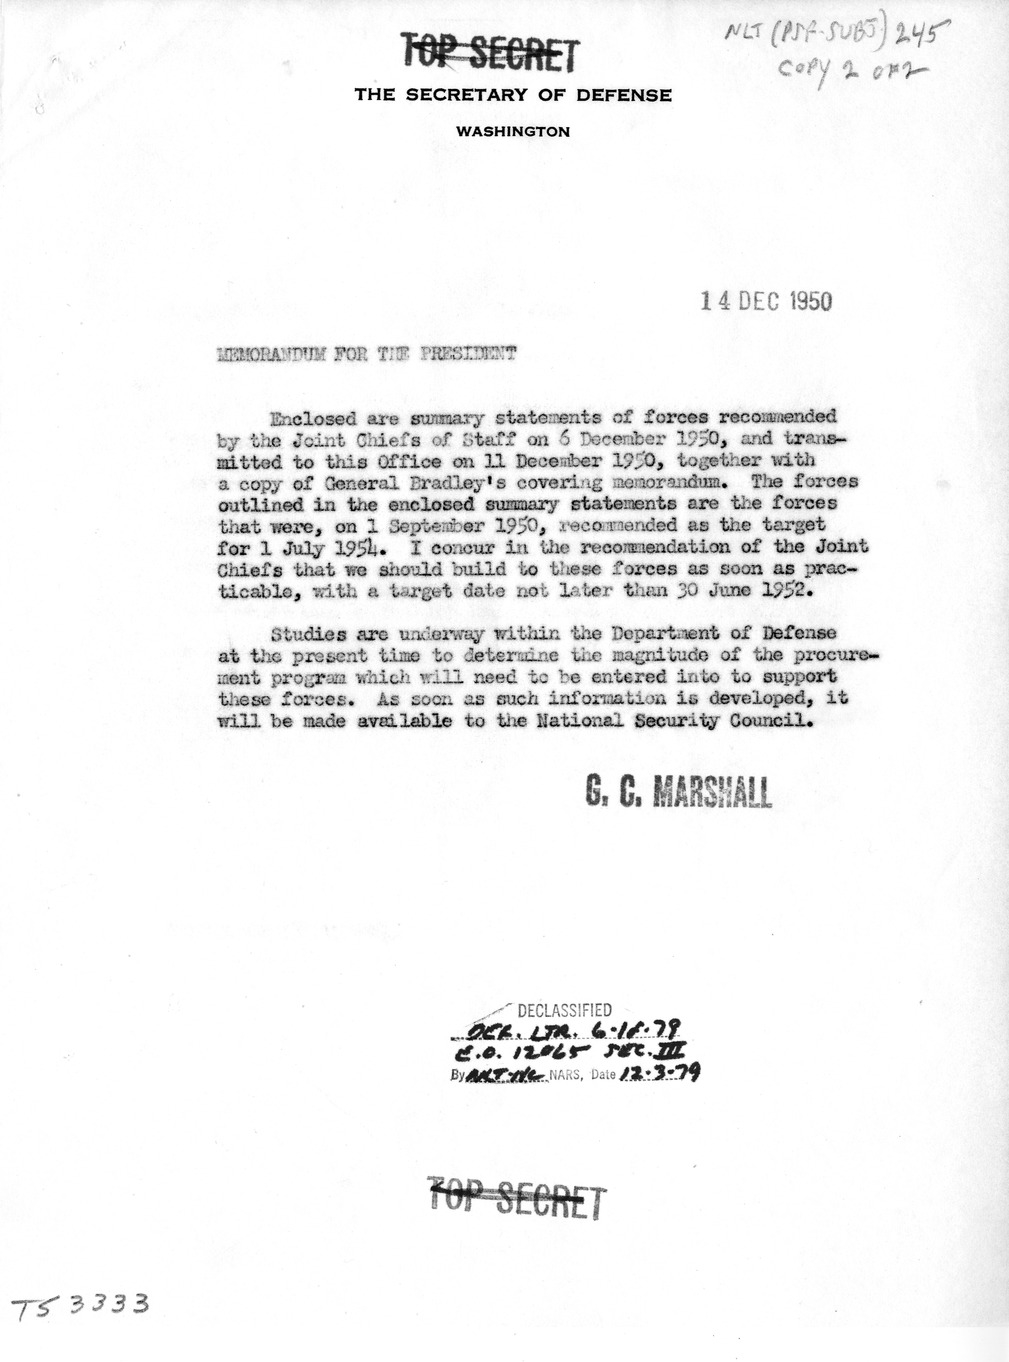 Memorandum from Secretary of Defense George Marshall to President Harry S. Truman with Attachments